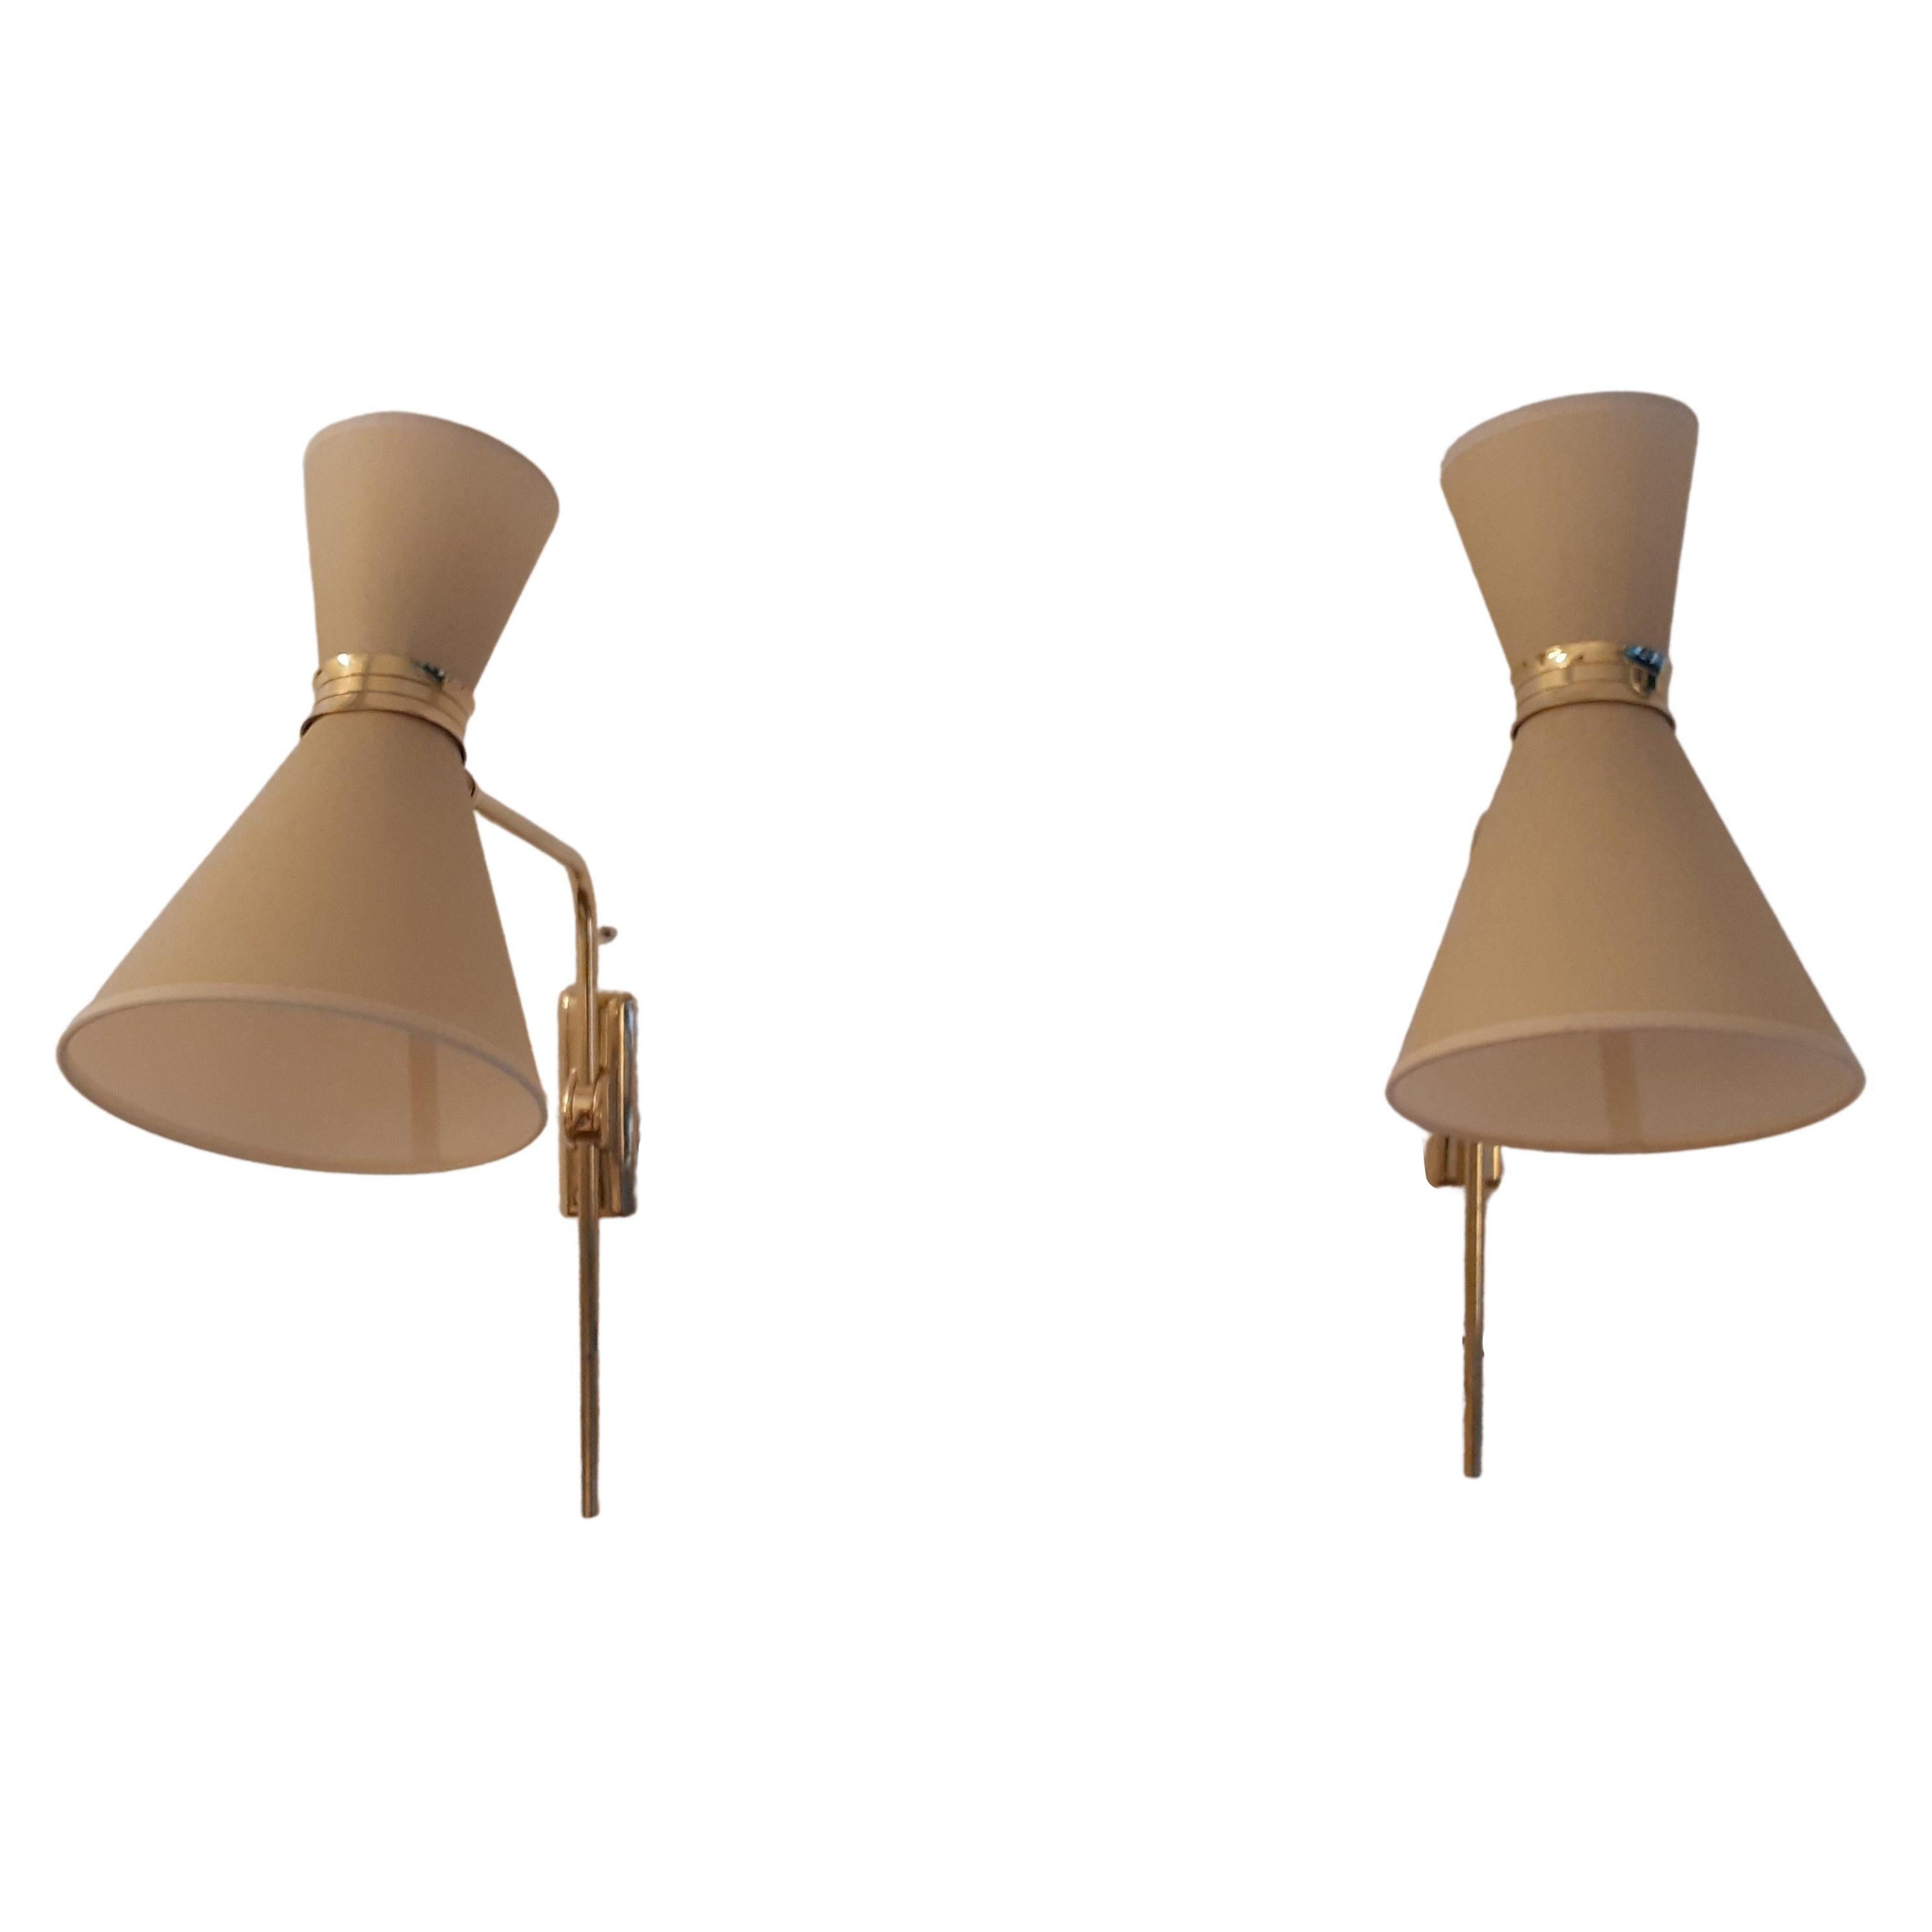 Pair of 1950s Articulated Wall Lights by Maison Lunel